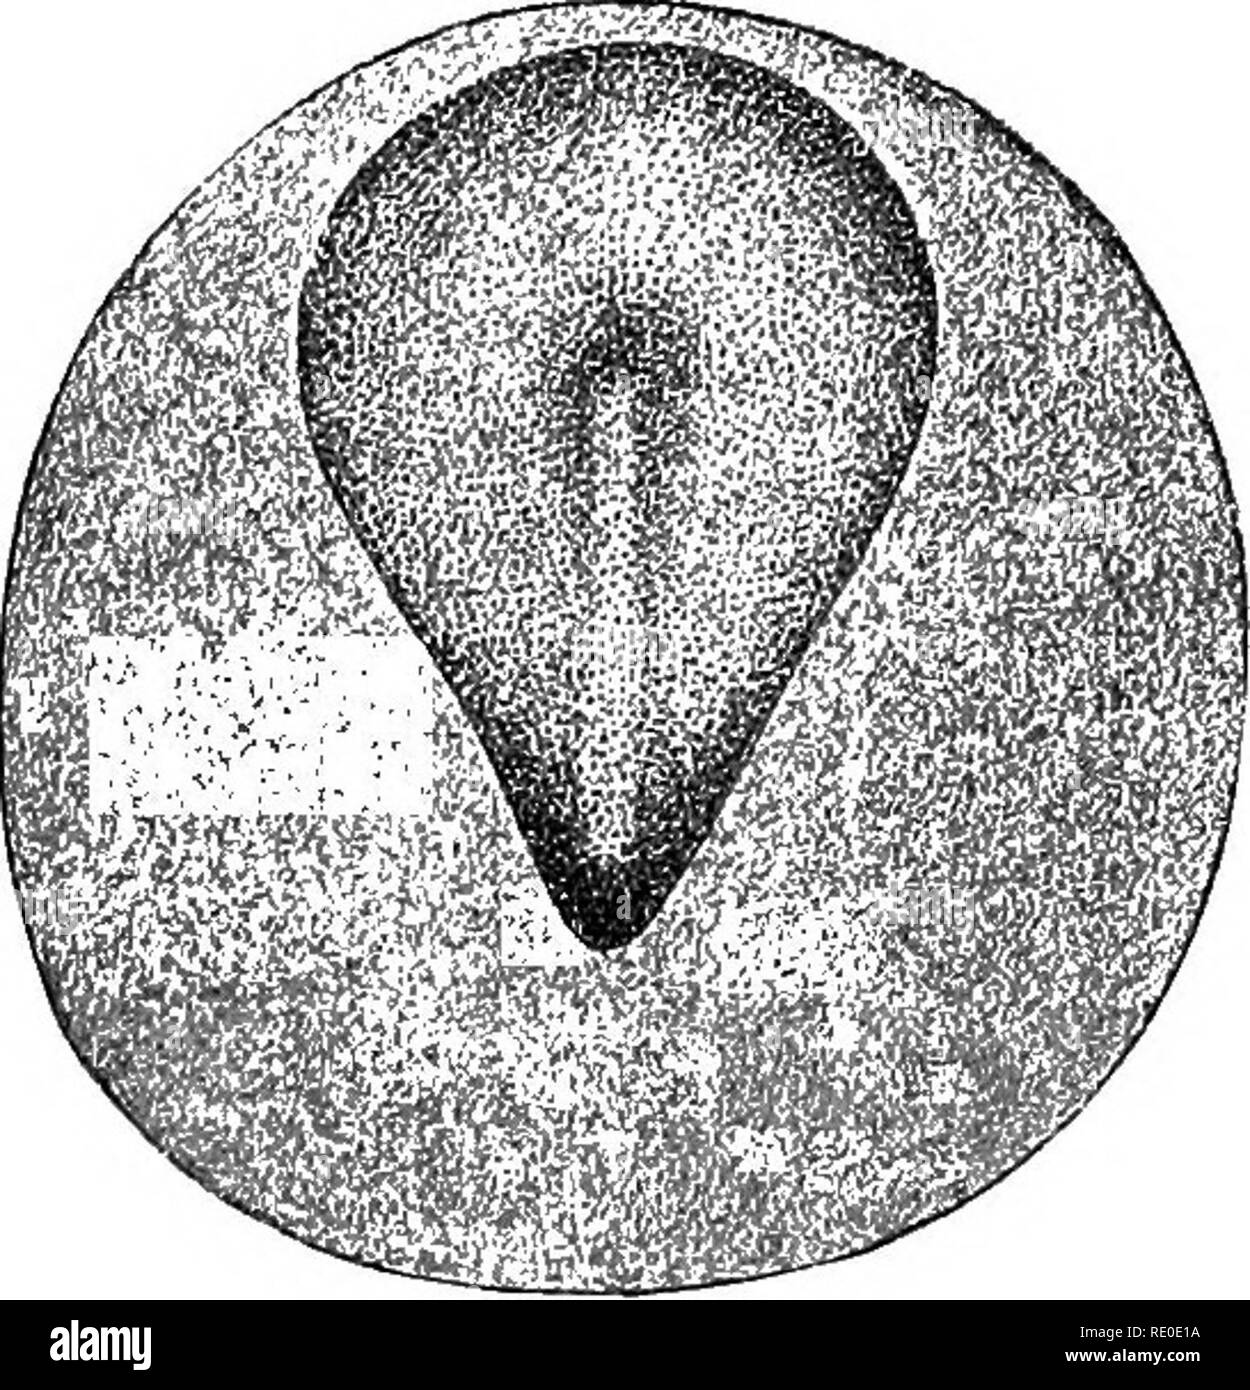 . A laboratory manual and text-book of embryology. Embryology. Fig. 20.—Diagrams showing the extent of the mesoderm in rabbit embryos (Kolliker). In A the mesoderm is represented by the pear-shaped area at the caudal end of the embryonic area; in B by the circular area which surrounds the embryonic area. ectoderm at the caudal edge of the germinal area. This forms the extra-embryonic mesoderm and takes no part in forming the body of the embryo. (2) The secondary or intraembryonic mesoderm, which gives rise to body tissues, takes Ectoderm Mesoderm Entoderm. Please note that these images are ext Stock Photo